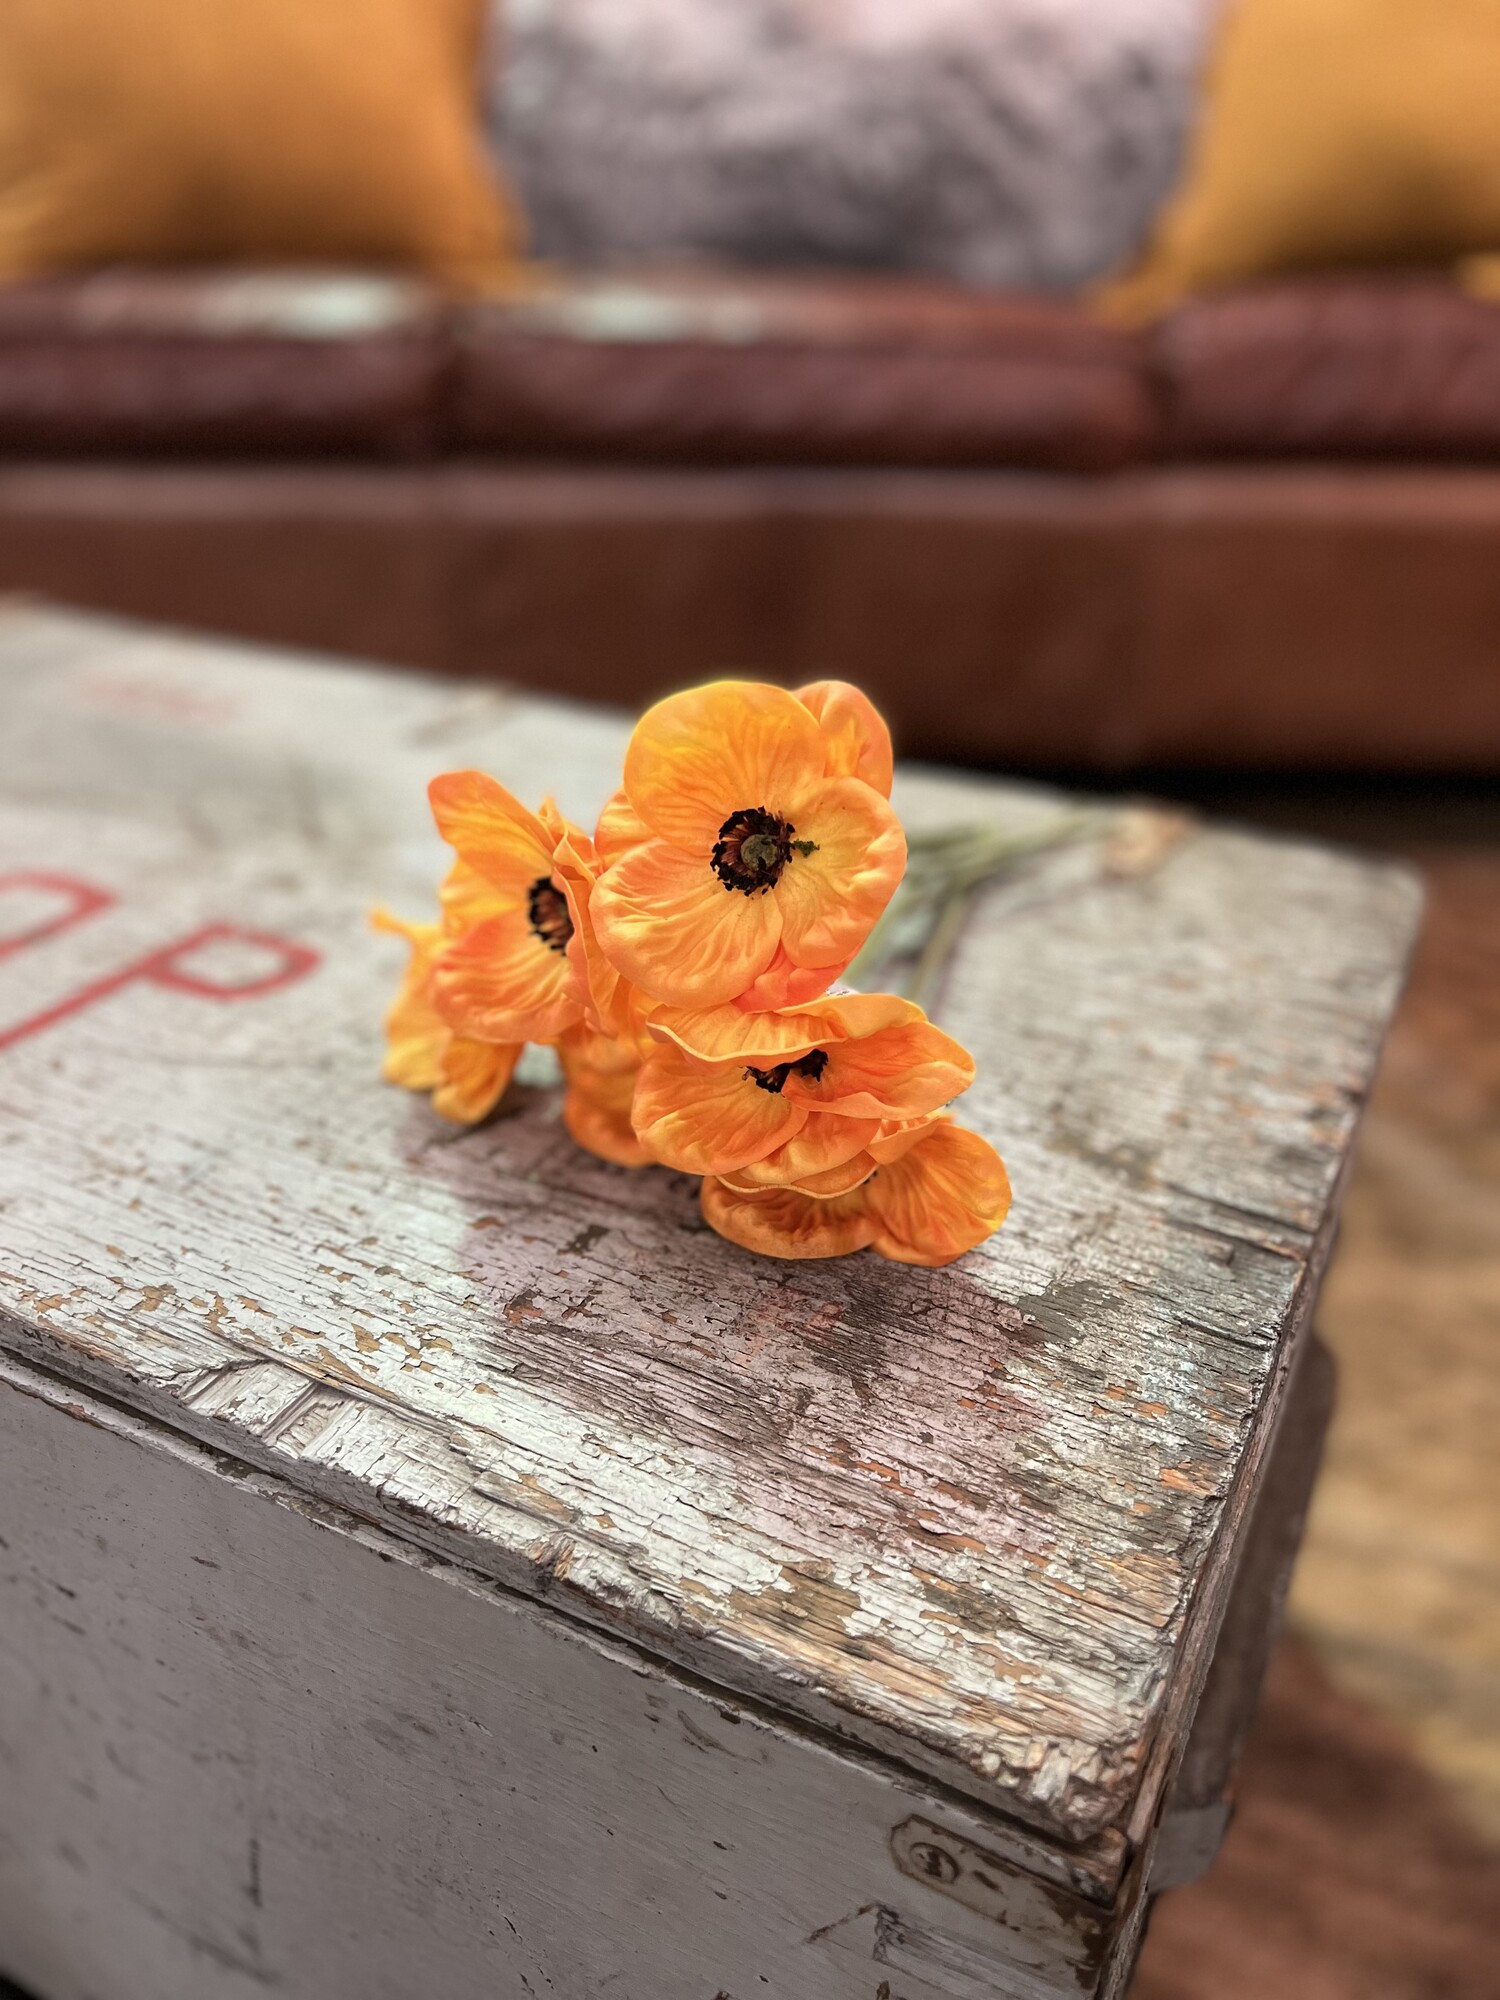 These lovely little poppies are a vibrant orange color and are real touch quality! With petals that feel real, you can guarentee a high end look for your home decor with these florals!

10 Inches Long